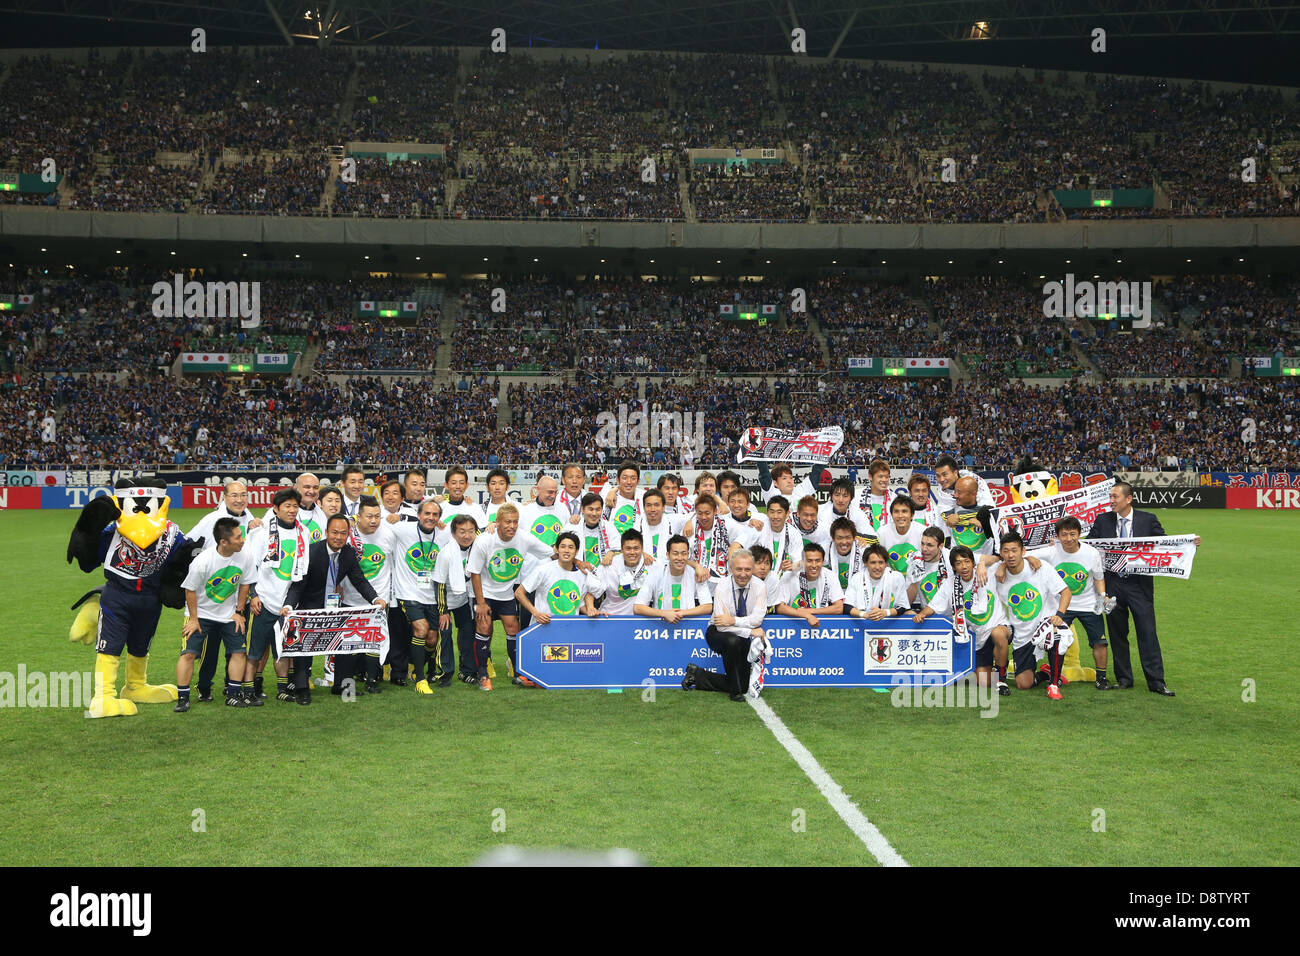 Saitama, Japan. 4th June 2013. Japan's national soccer team celebrate after their FIFA World Cup Brazil 2014 Asian Qualifier Final Round Group B between Japan 1-1 Australia at Saitama Stadium 2002, Saitama, Japan. (Photo by Kenzaburo Matsuoka/AFLO/Alamy Live News)  14 Stock Photo